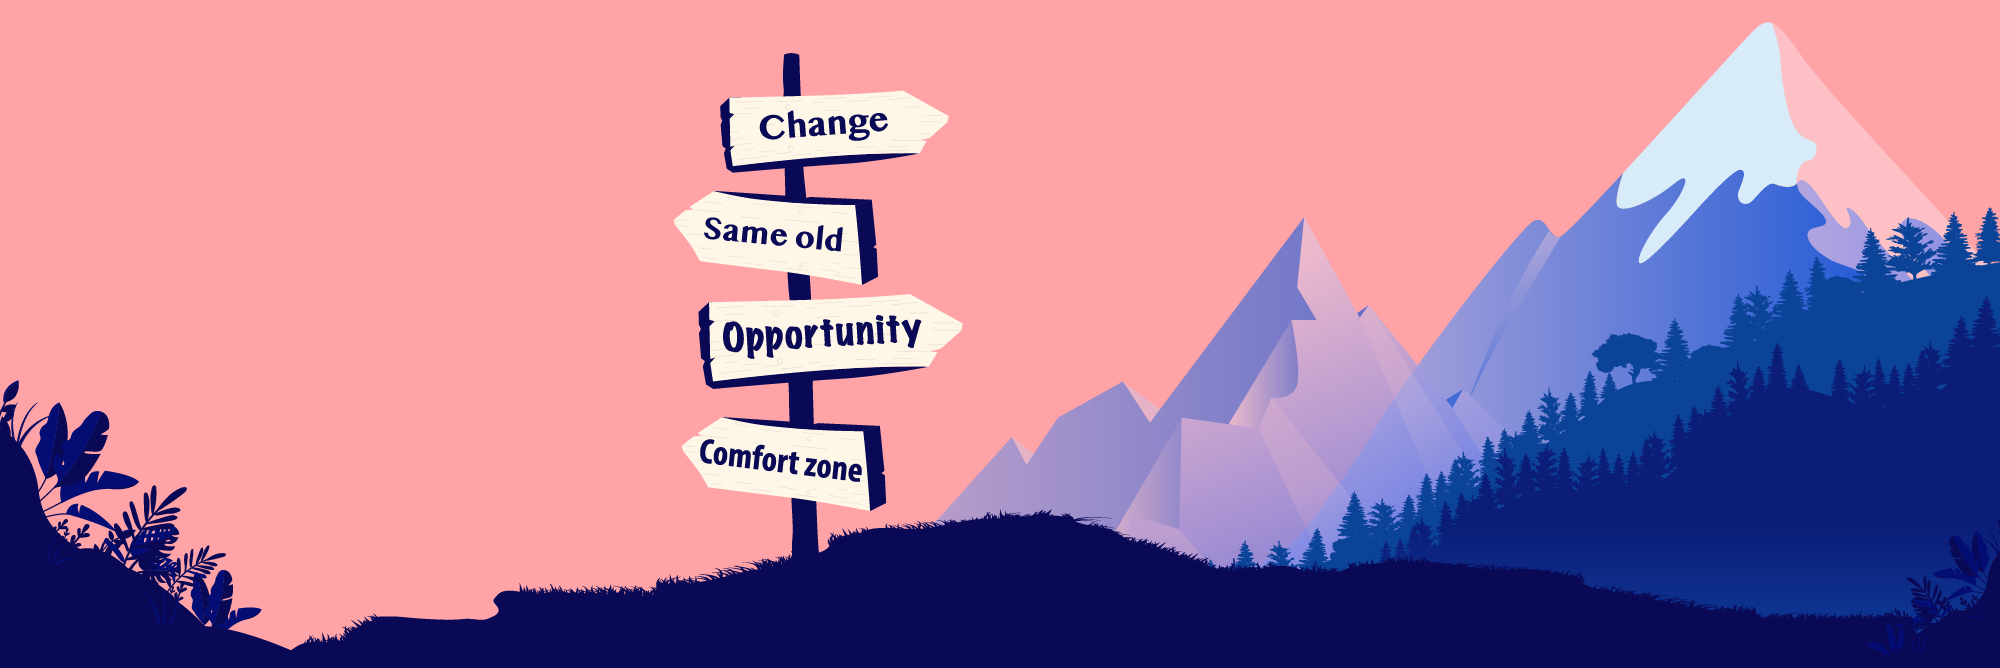 road sign with the words "change" and "opportunity" pointing one way and "Same old" and Comfort zone" pointing the opposite way